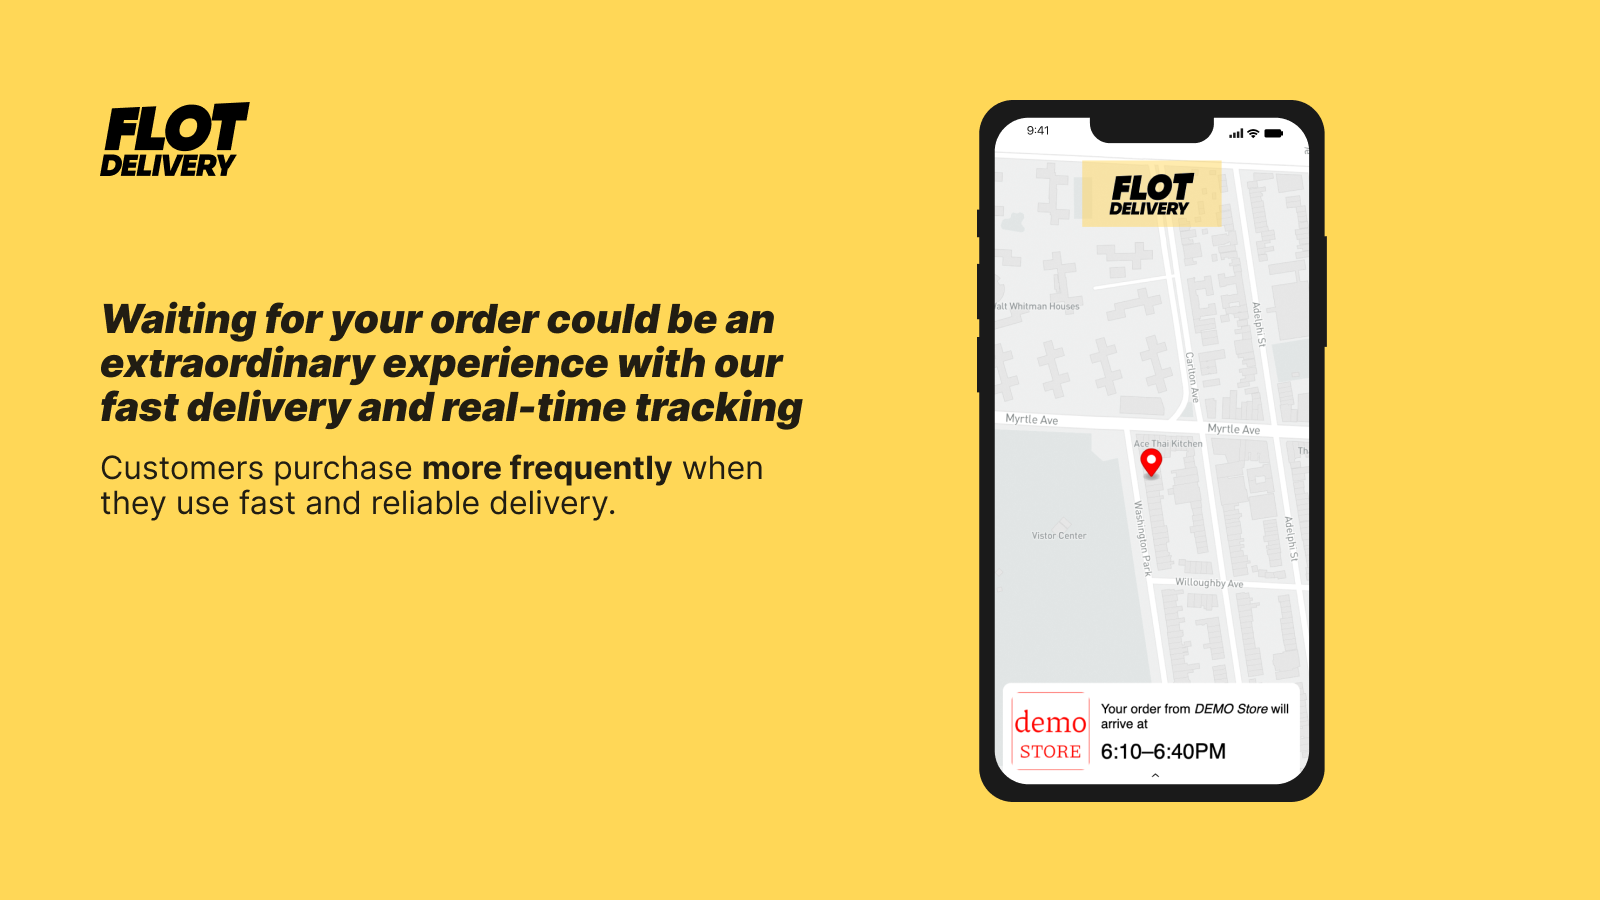 Provide your customers fast delivery and real-time tracking